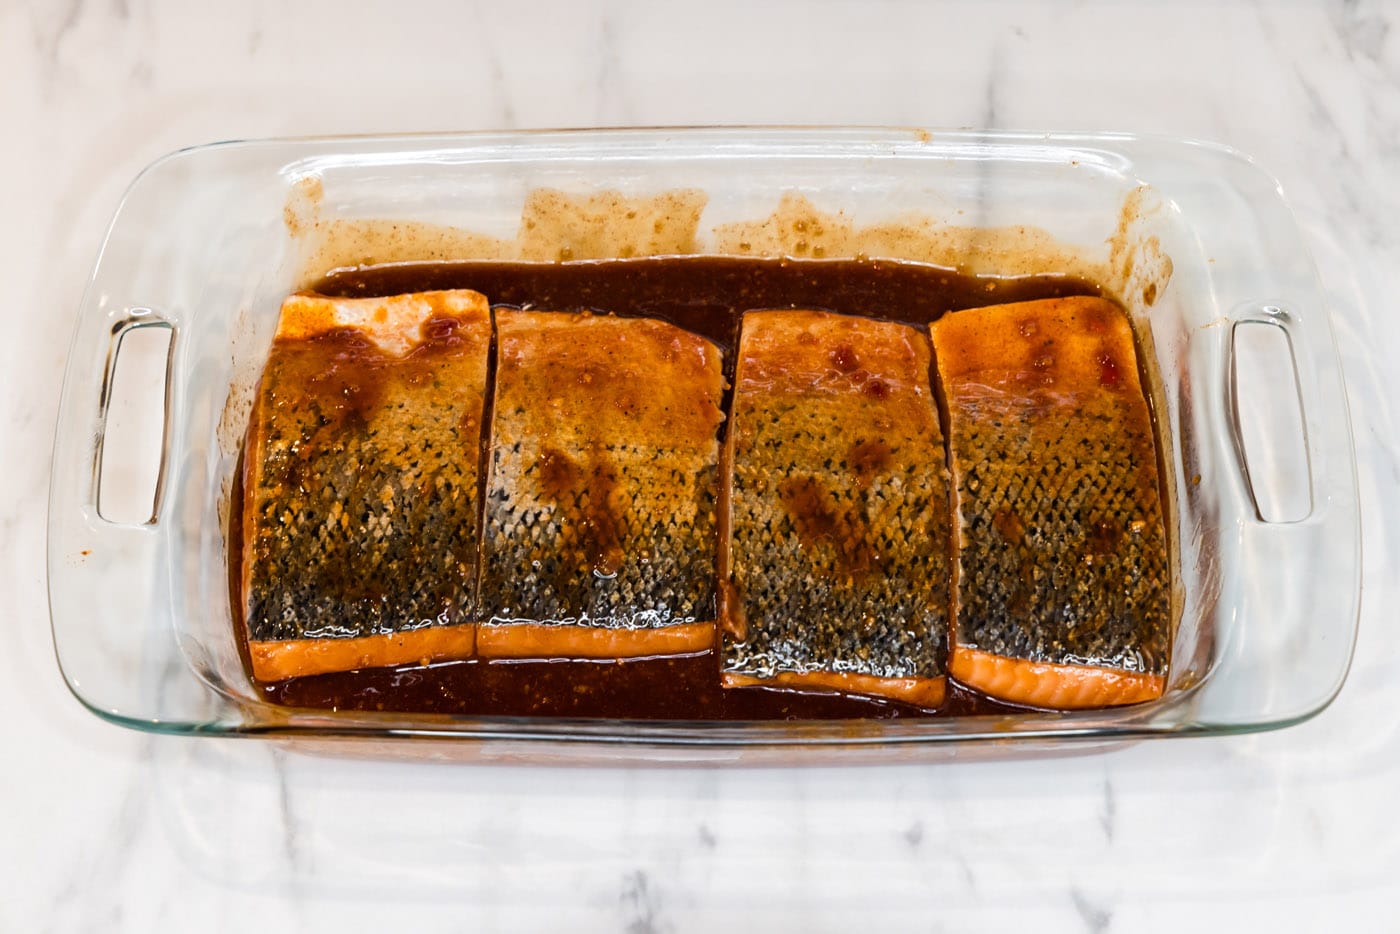 coating salmon filets in spicy marinade